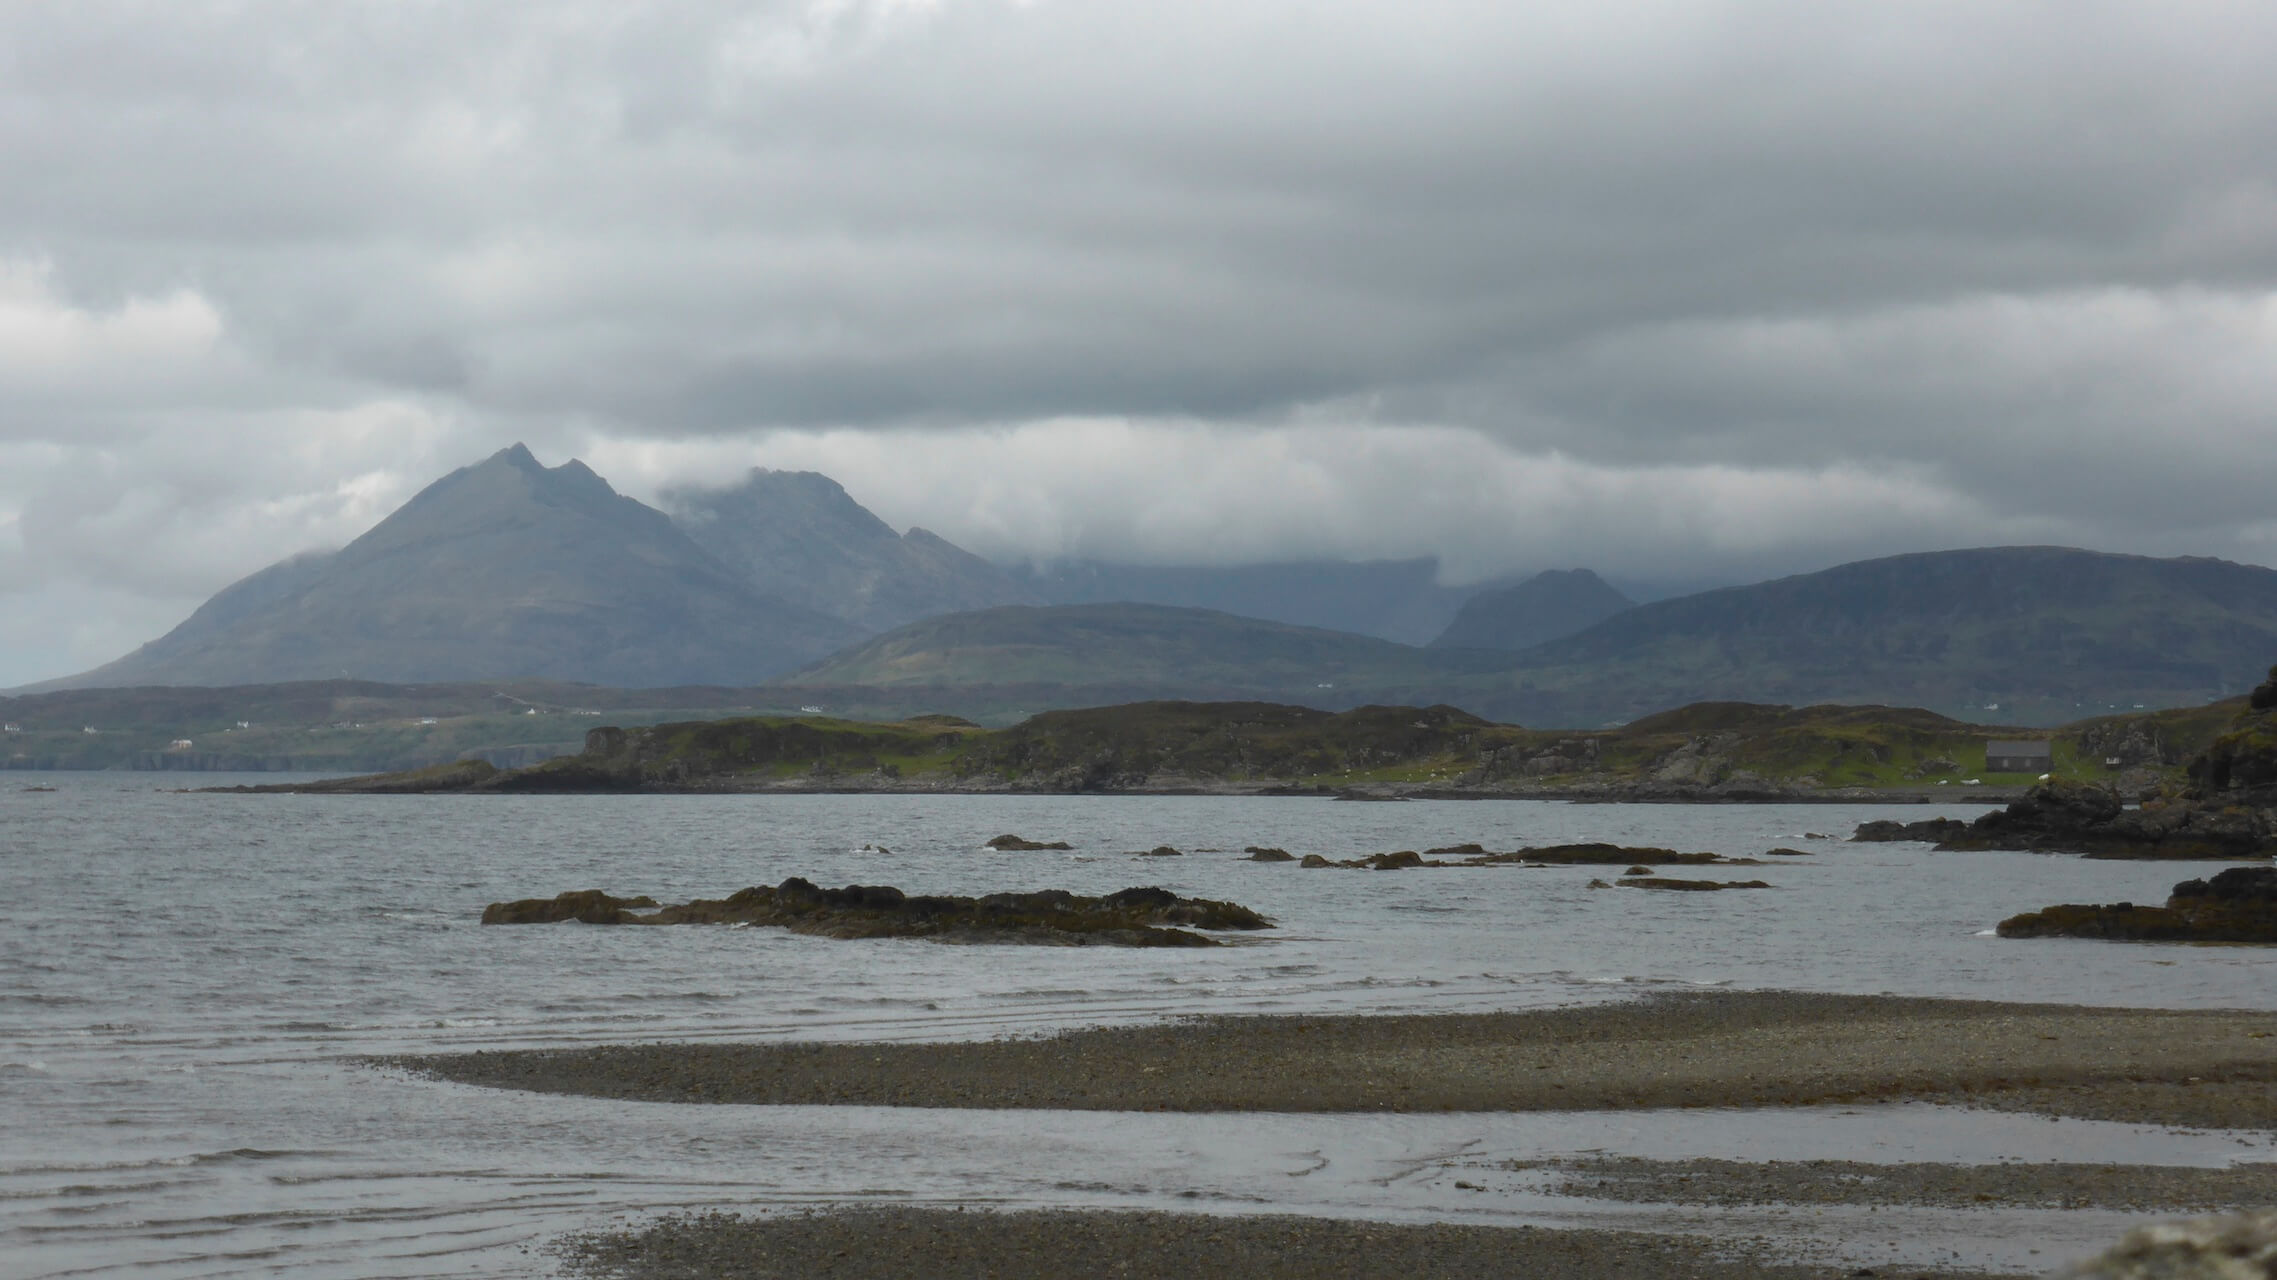 View of the Cuillins mountains from the Sleat Peninsula, Skye